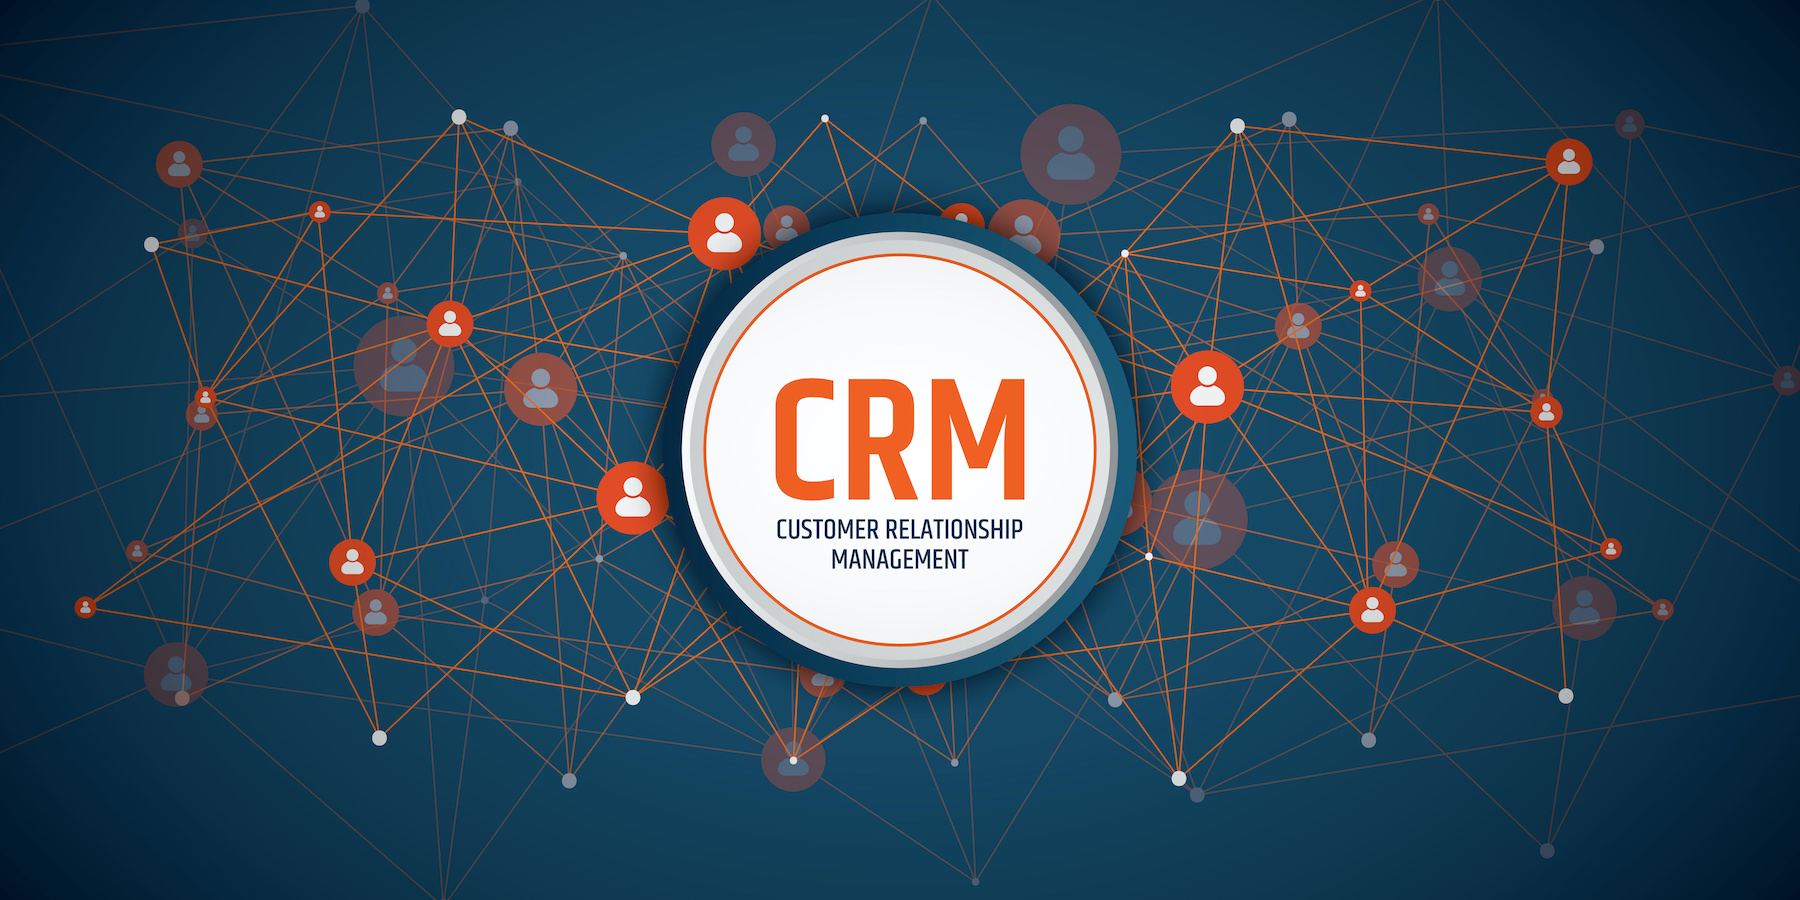 client relationship concept graphic CRM in white circle with orange connections to network of orange and white person icons on dark blue background; blog: 5 Tips for Building Strong Client Relationships